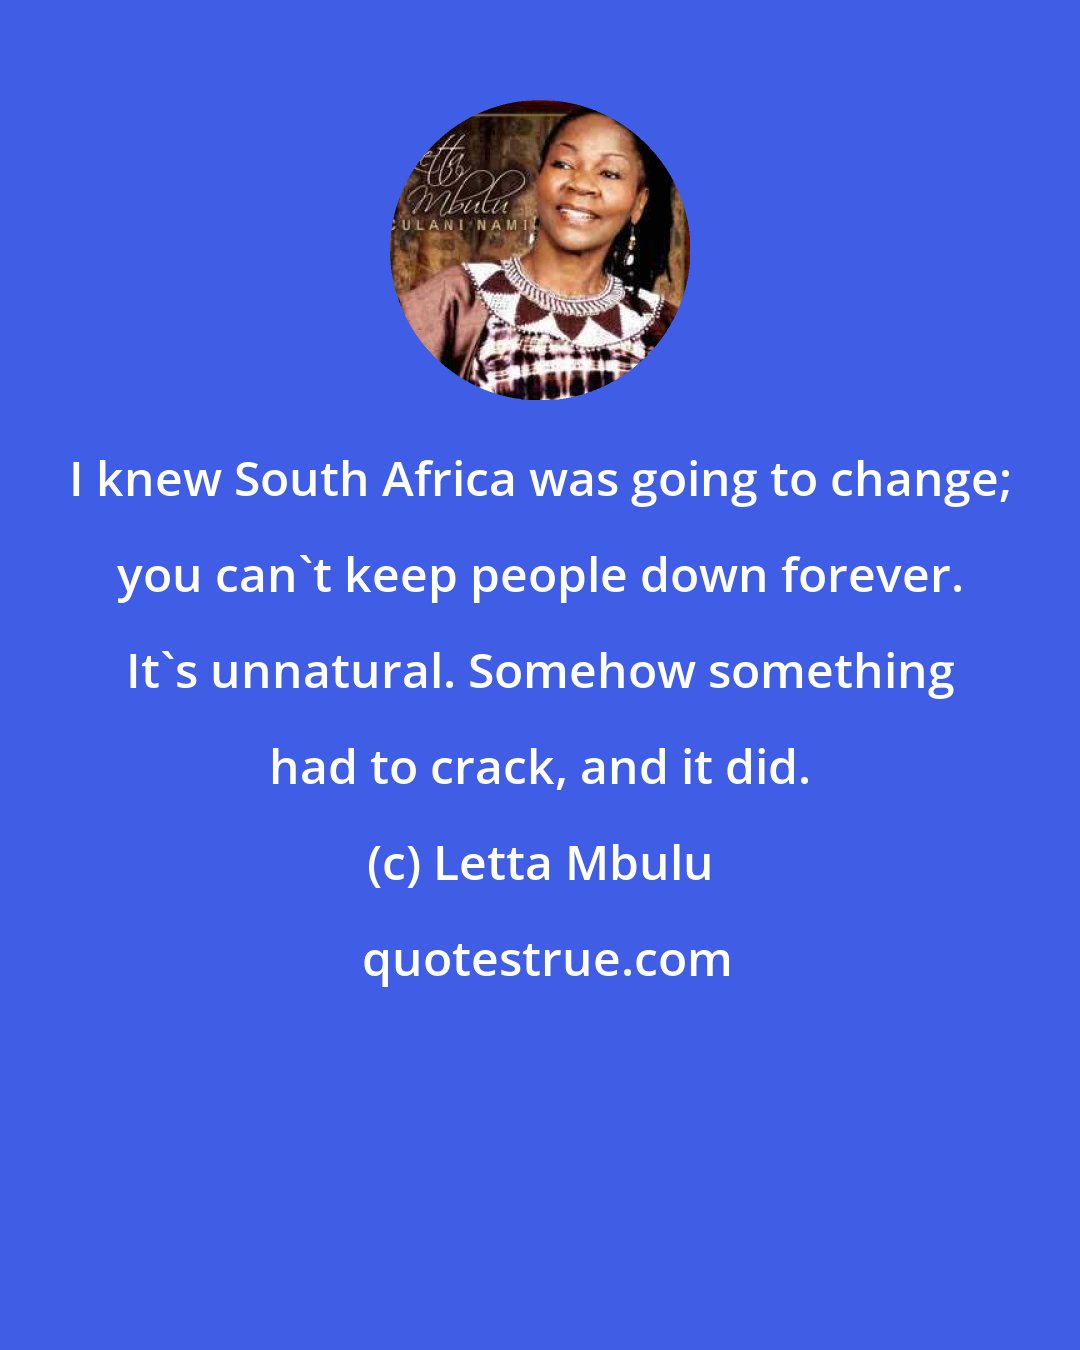 Letta Mbulu: I knew South Africa was going to change; you can't keep people down forever. It's unnatural. Somehow something had to crack, and it did.